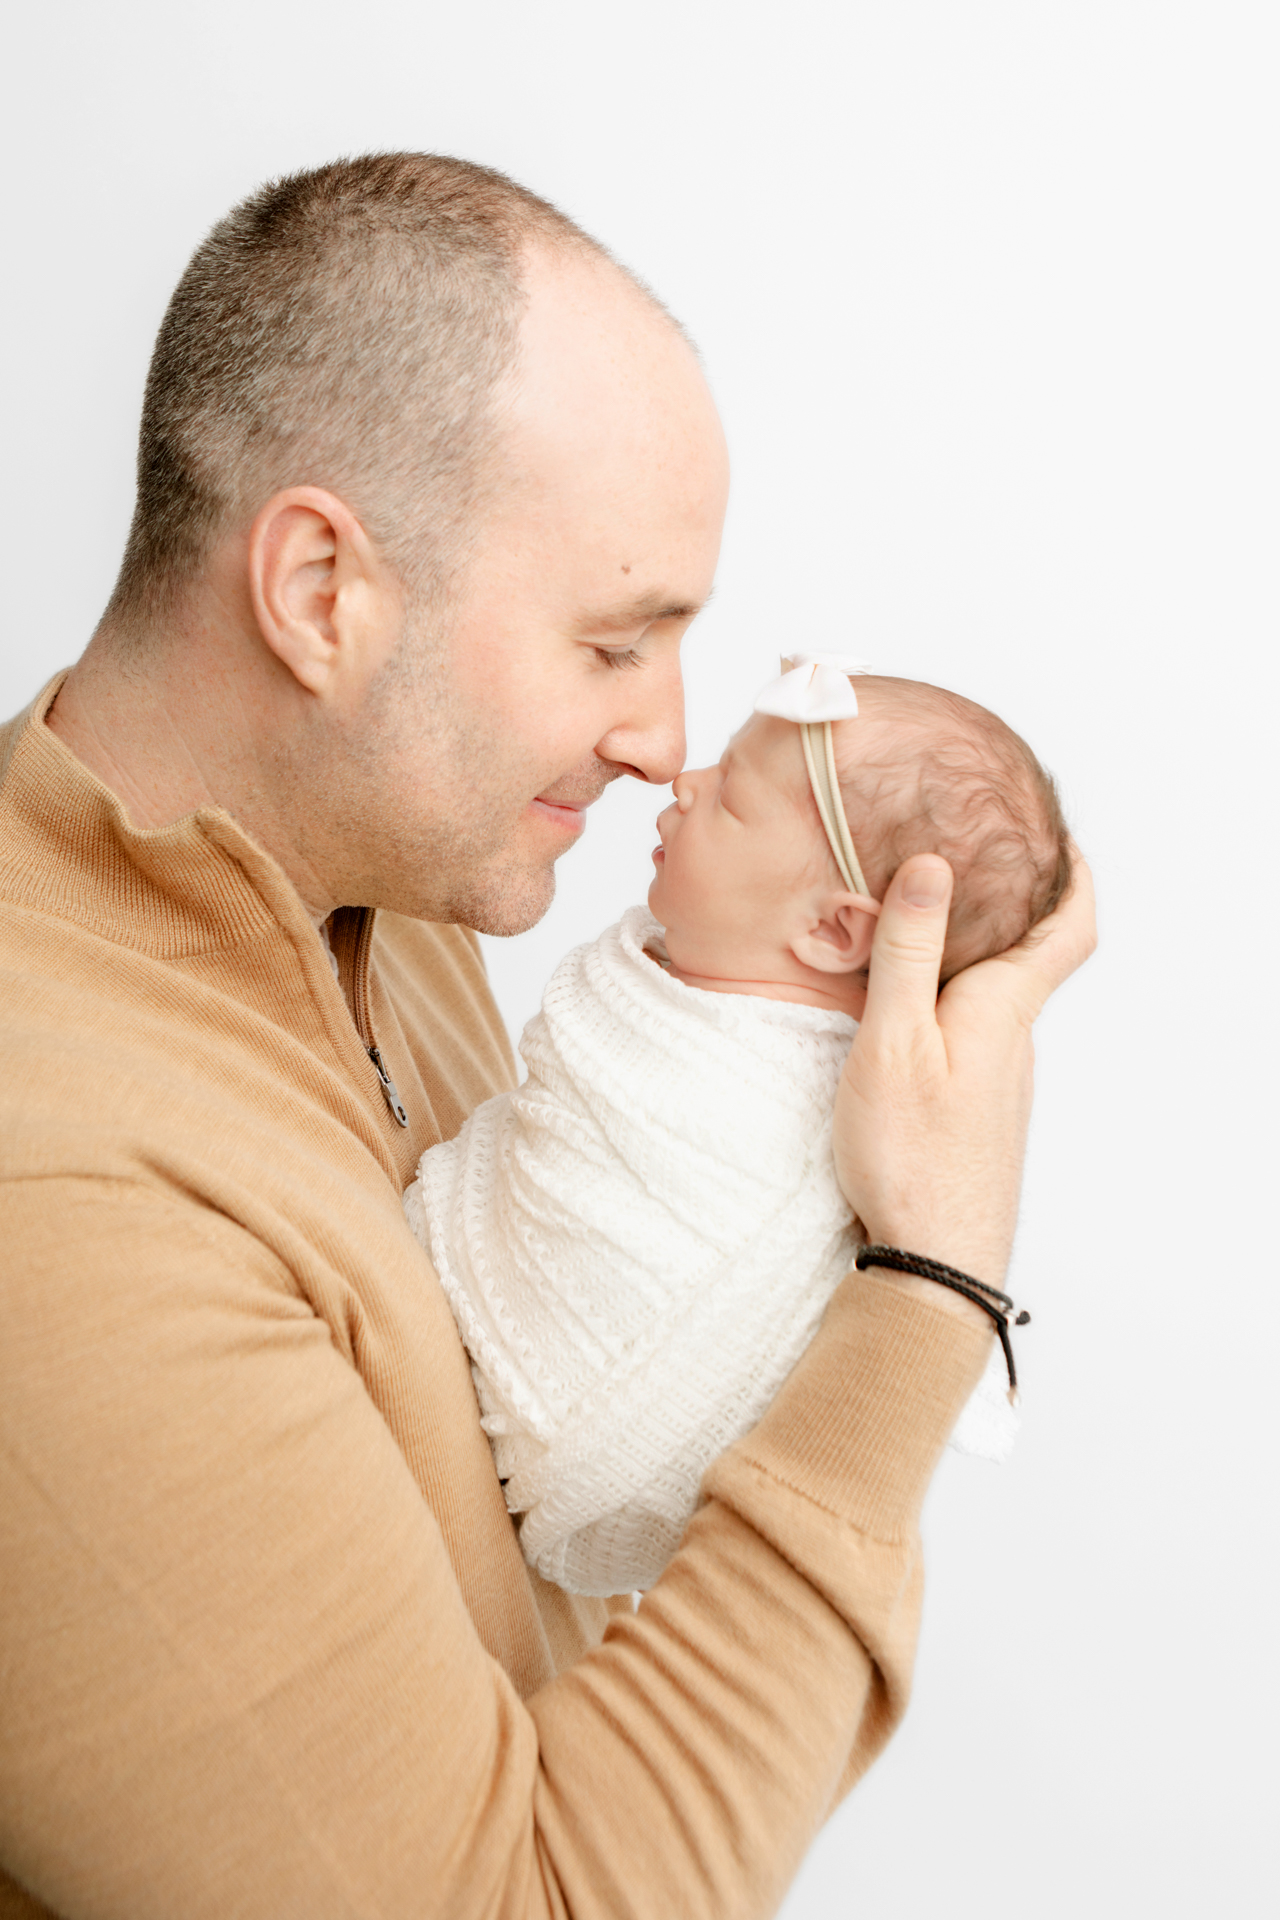 new dad with very short hair and stubble touching noses with his newborn baby girl